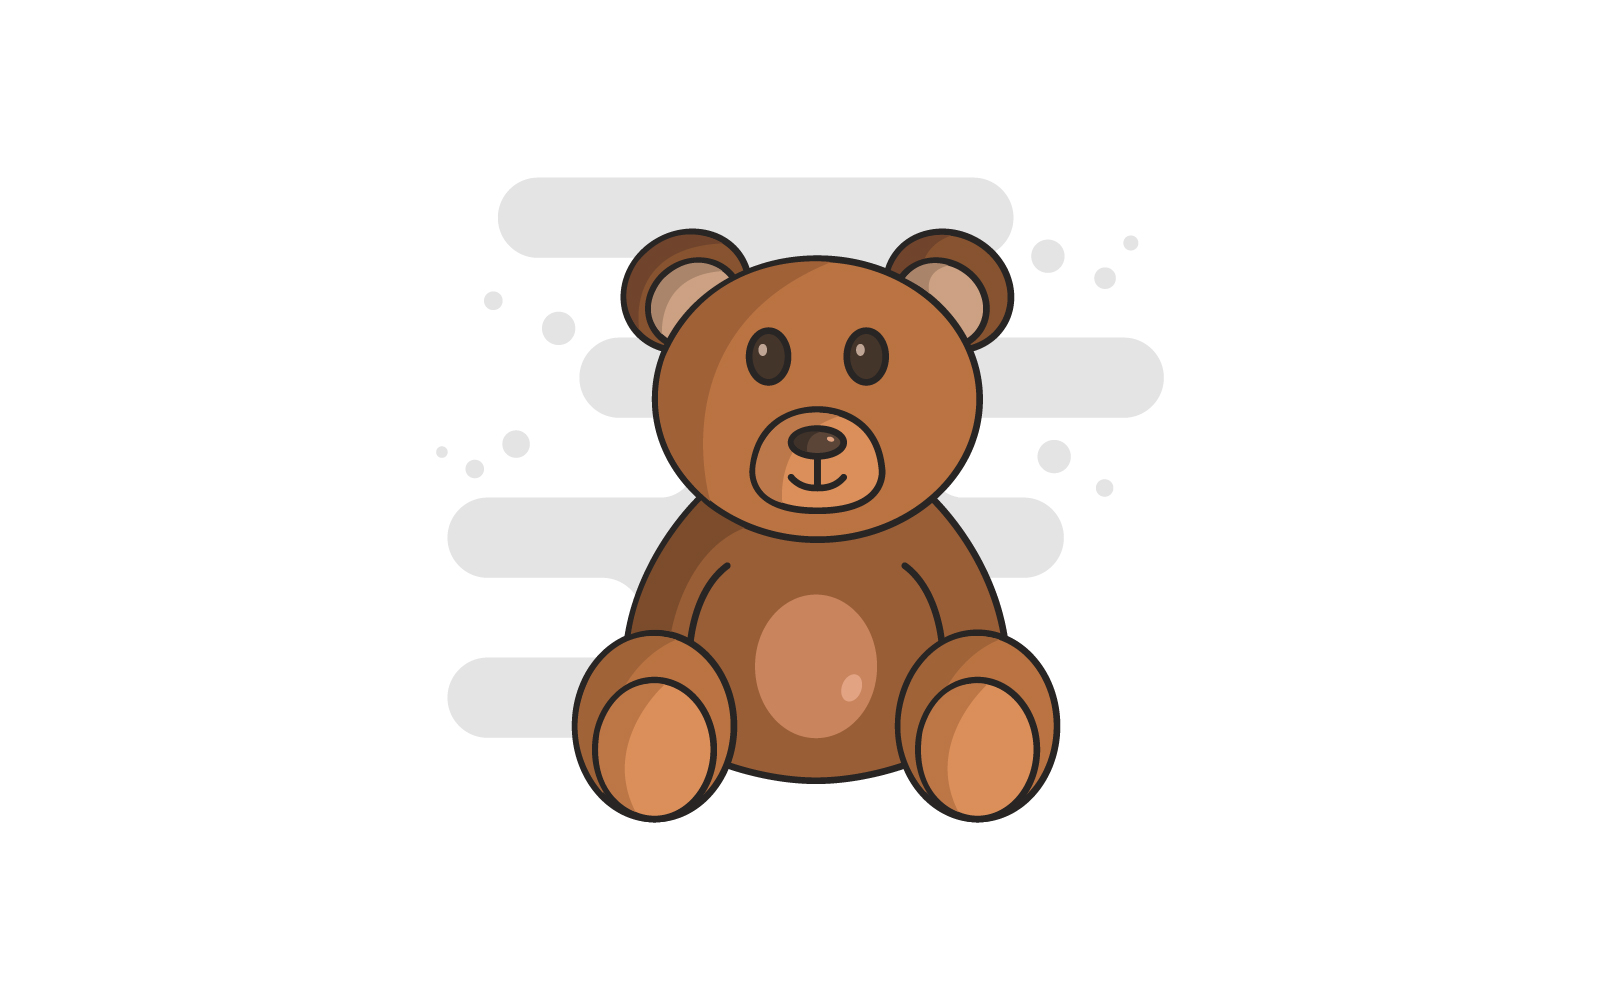 Teddy bear illustrated in vector on a white background